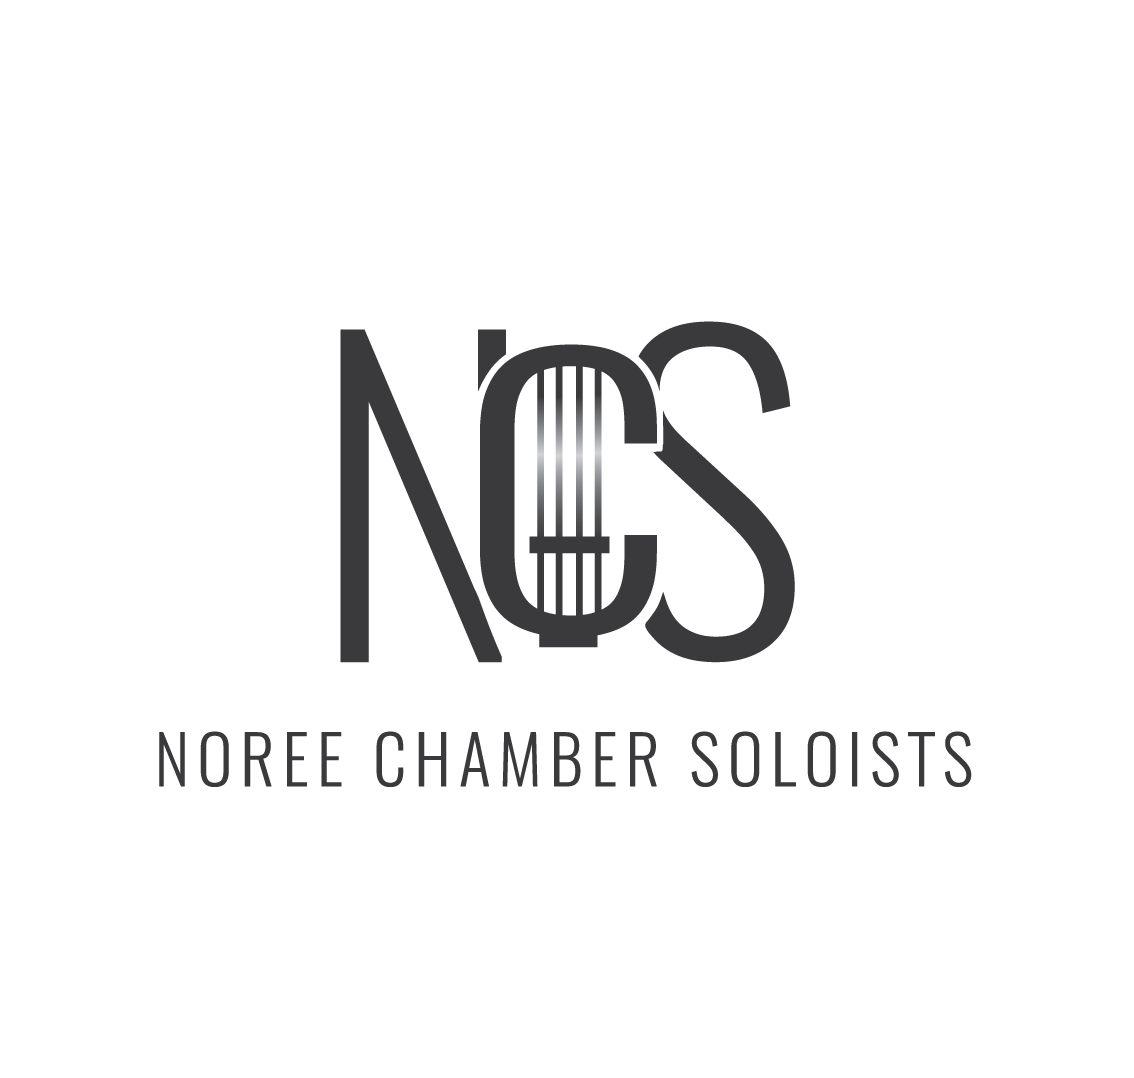 Noree Chamber Soloists logo